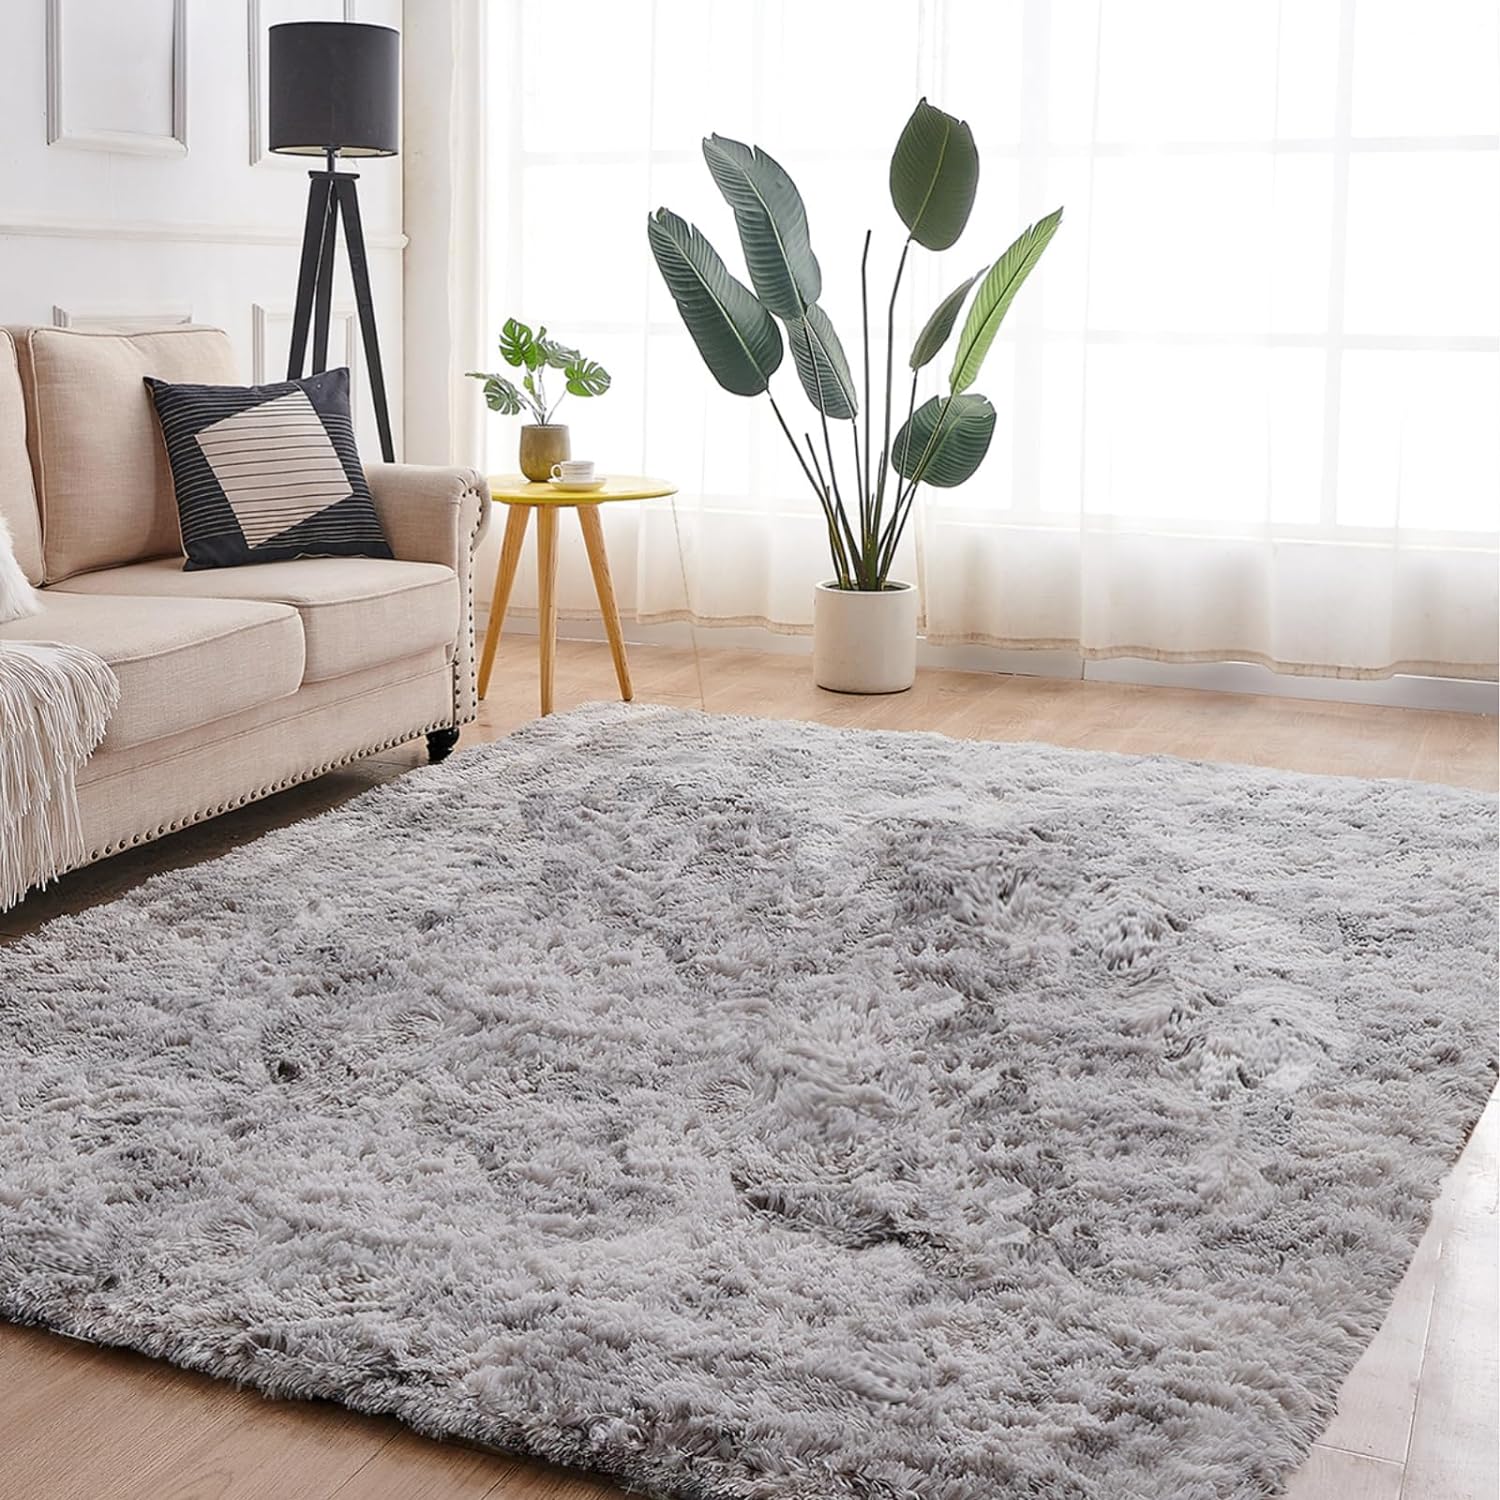 Floralux 5x7 Rugs Light Gray Tie-Dyed, Shag Area Rugs 5x7 for Bedroom, Fluffy Carpets Rugs for Living Room, (5x7 Ft., Tie-Dyed Light Gray)